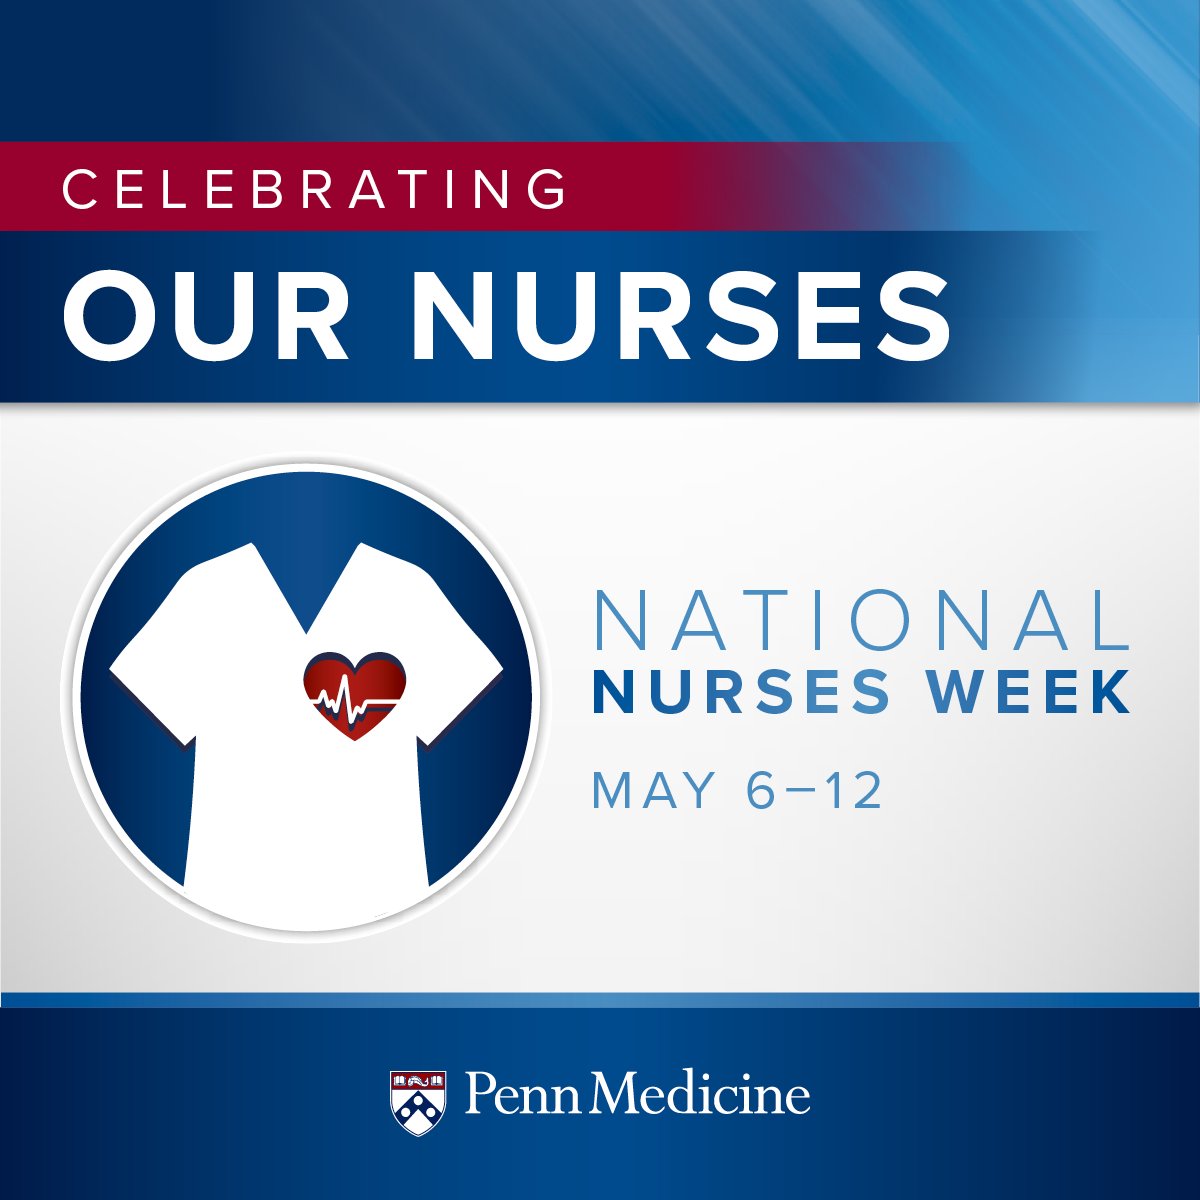 As we celebrate #NursesWeek, we extend a special thank you to the incredible Penn trauma nurses. With outstanding skill and unwavering commitment, they are an invaluable part of providing life-saving care from the moment a patient enters the trauma bay to their recovery.